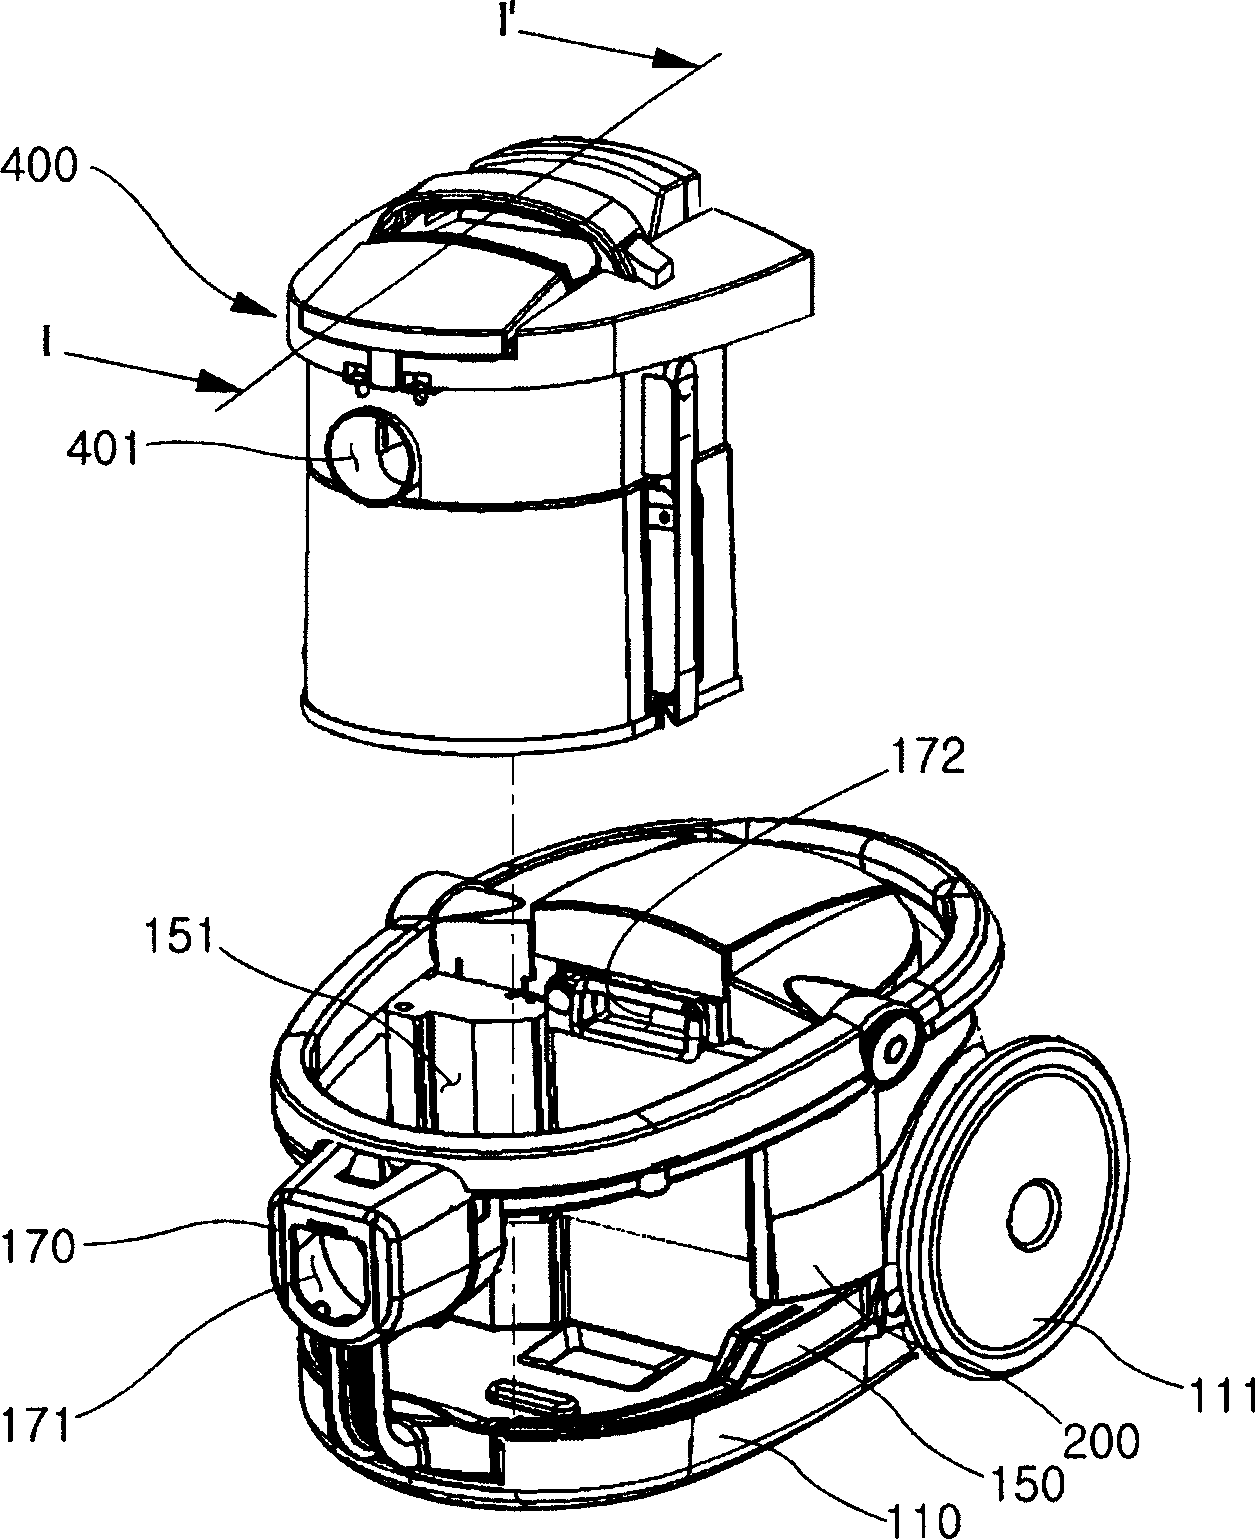 Channel structure of vacuum cleaner